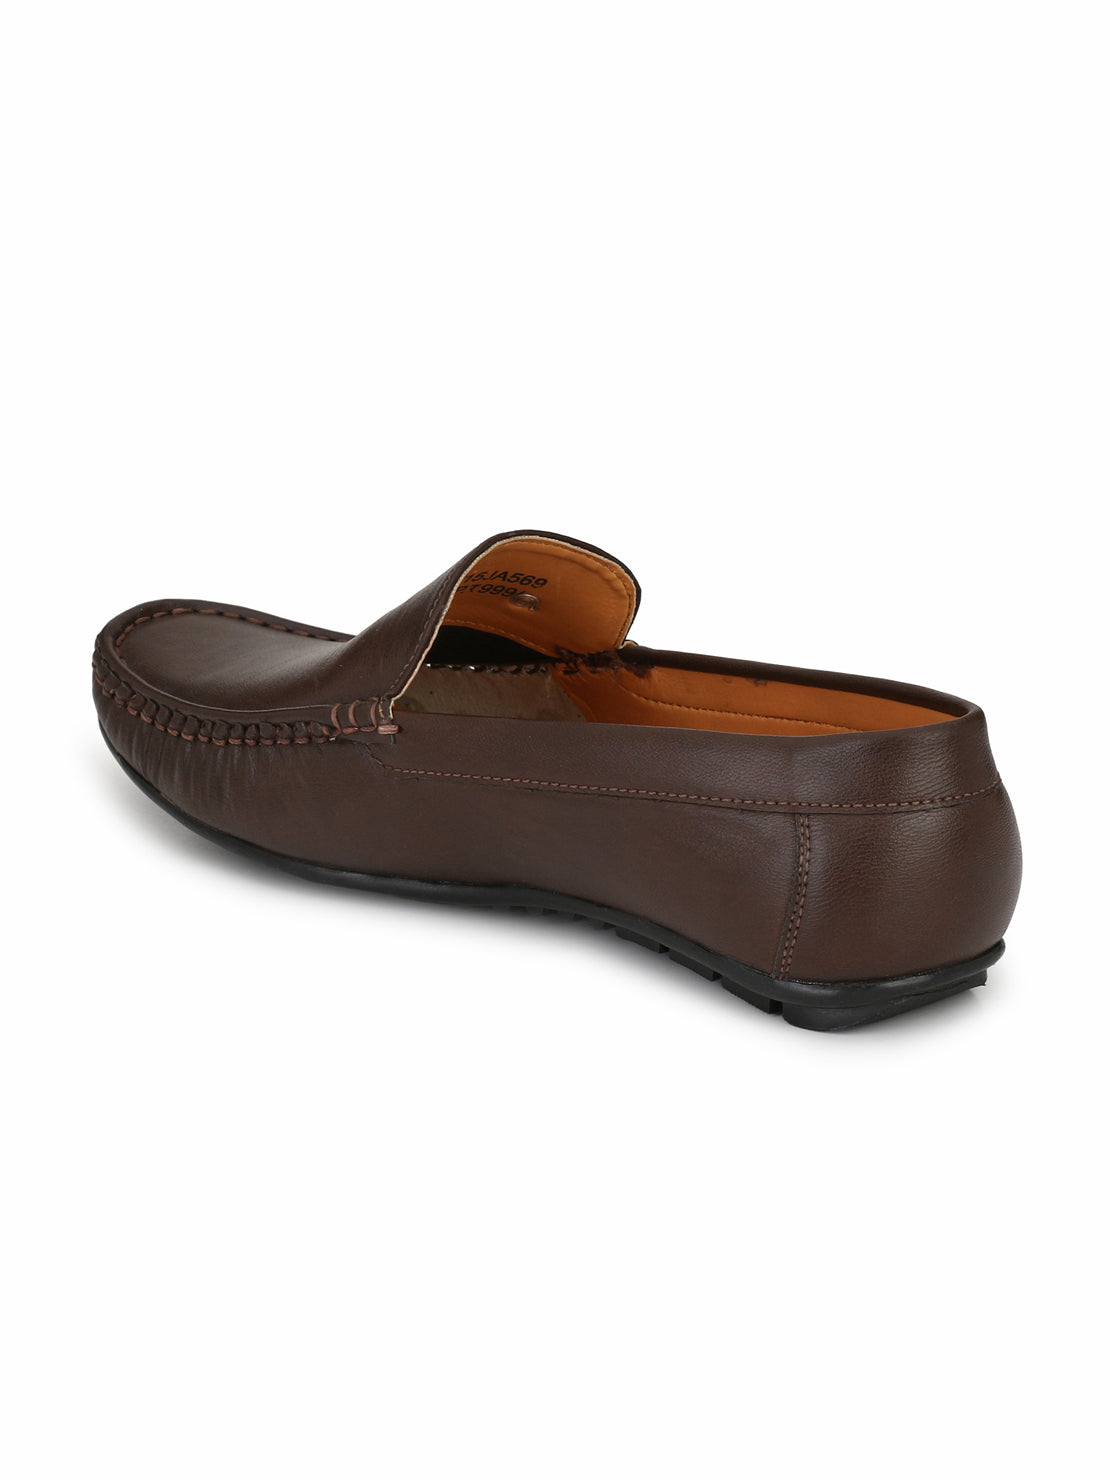 Guava Men's Brown Casual Slip On Driving Loafers (GV15JA611)